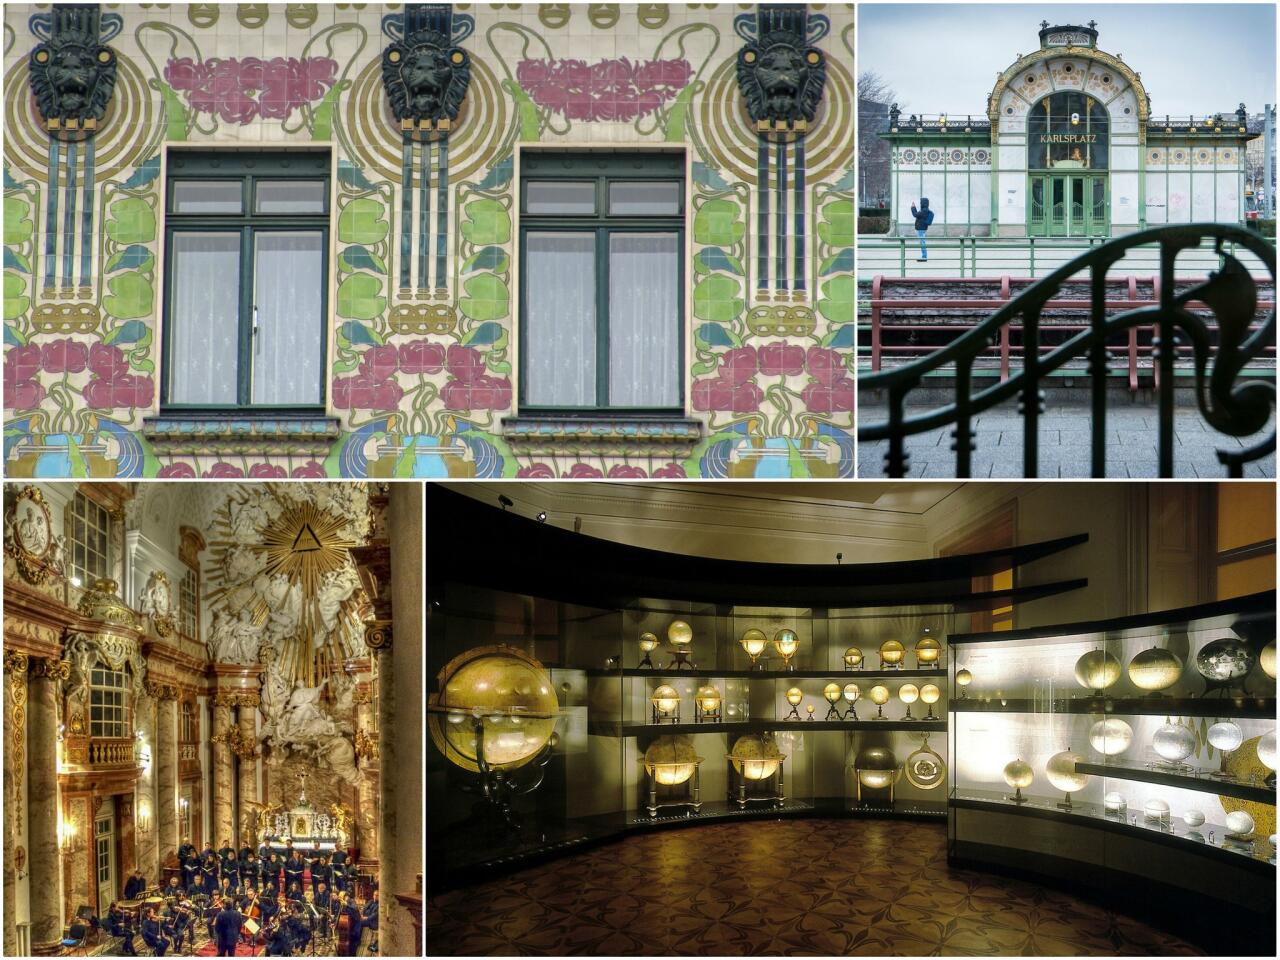 Clockwise from top left: The Majolica House; Karlsplatz Stadtbahn Station; The Globe Museum of the Austrian National Library; St. Charles Church.